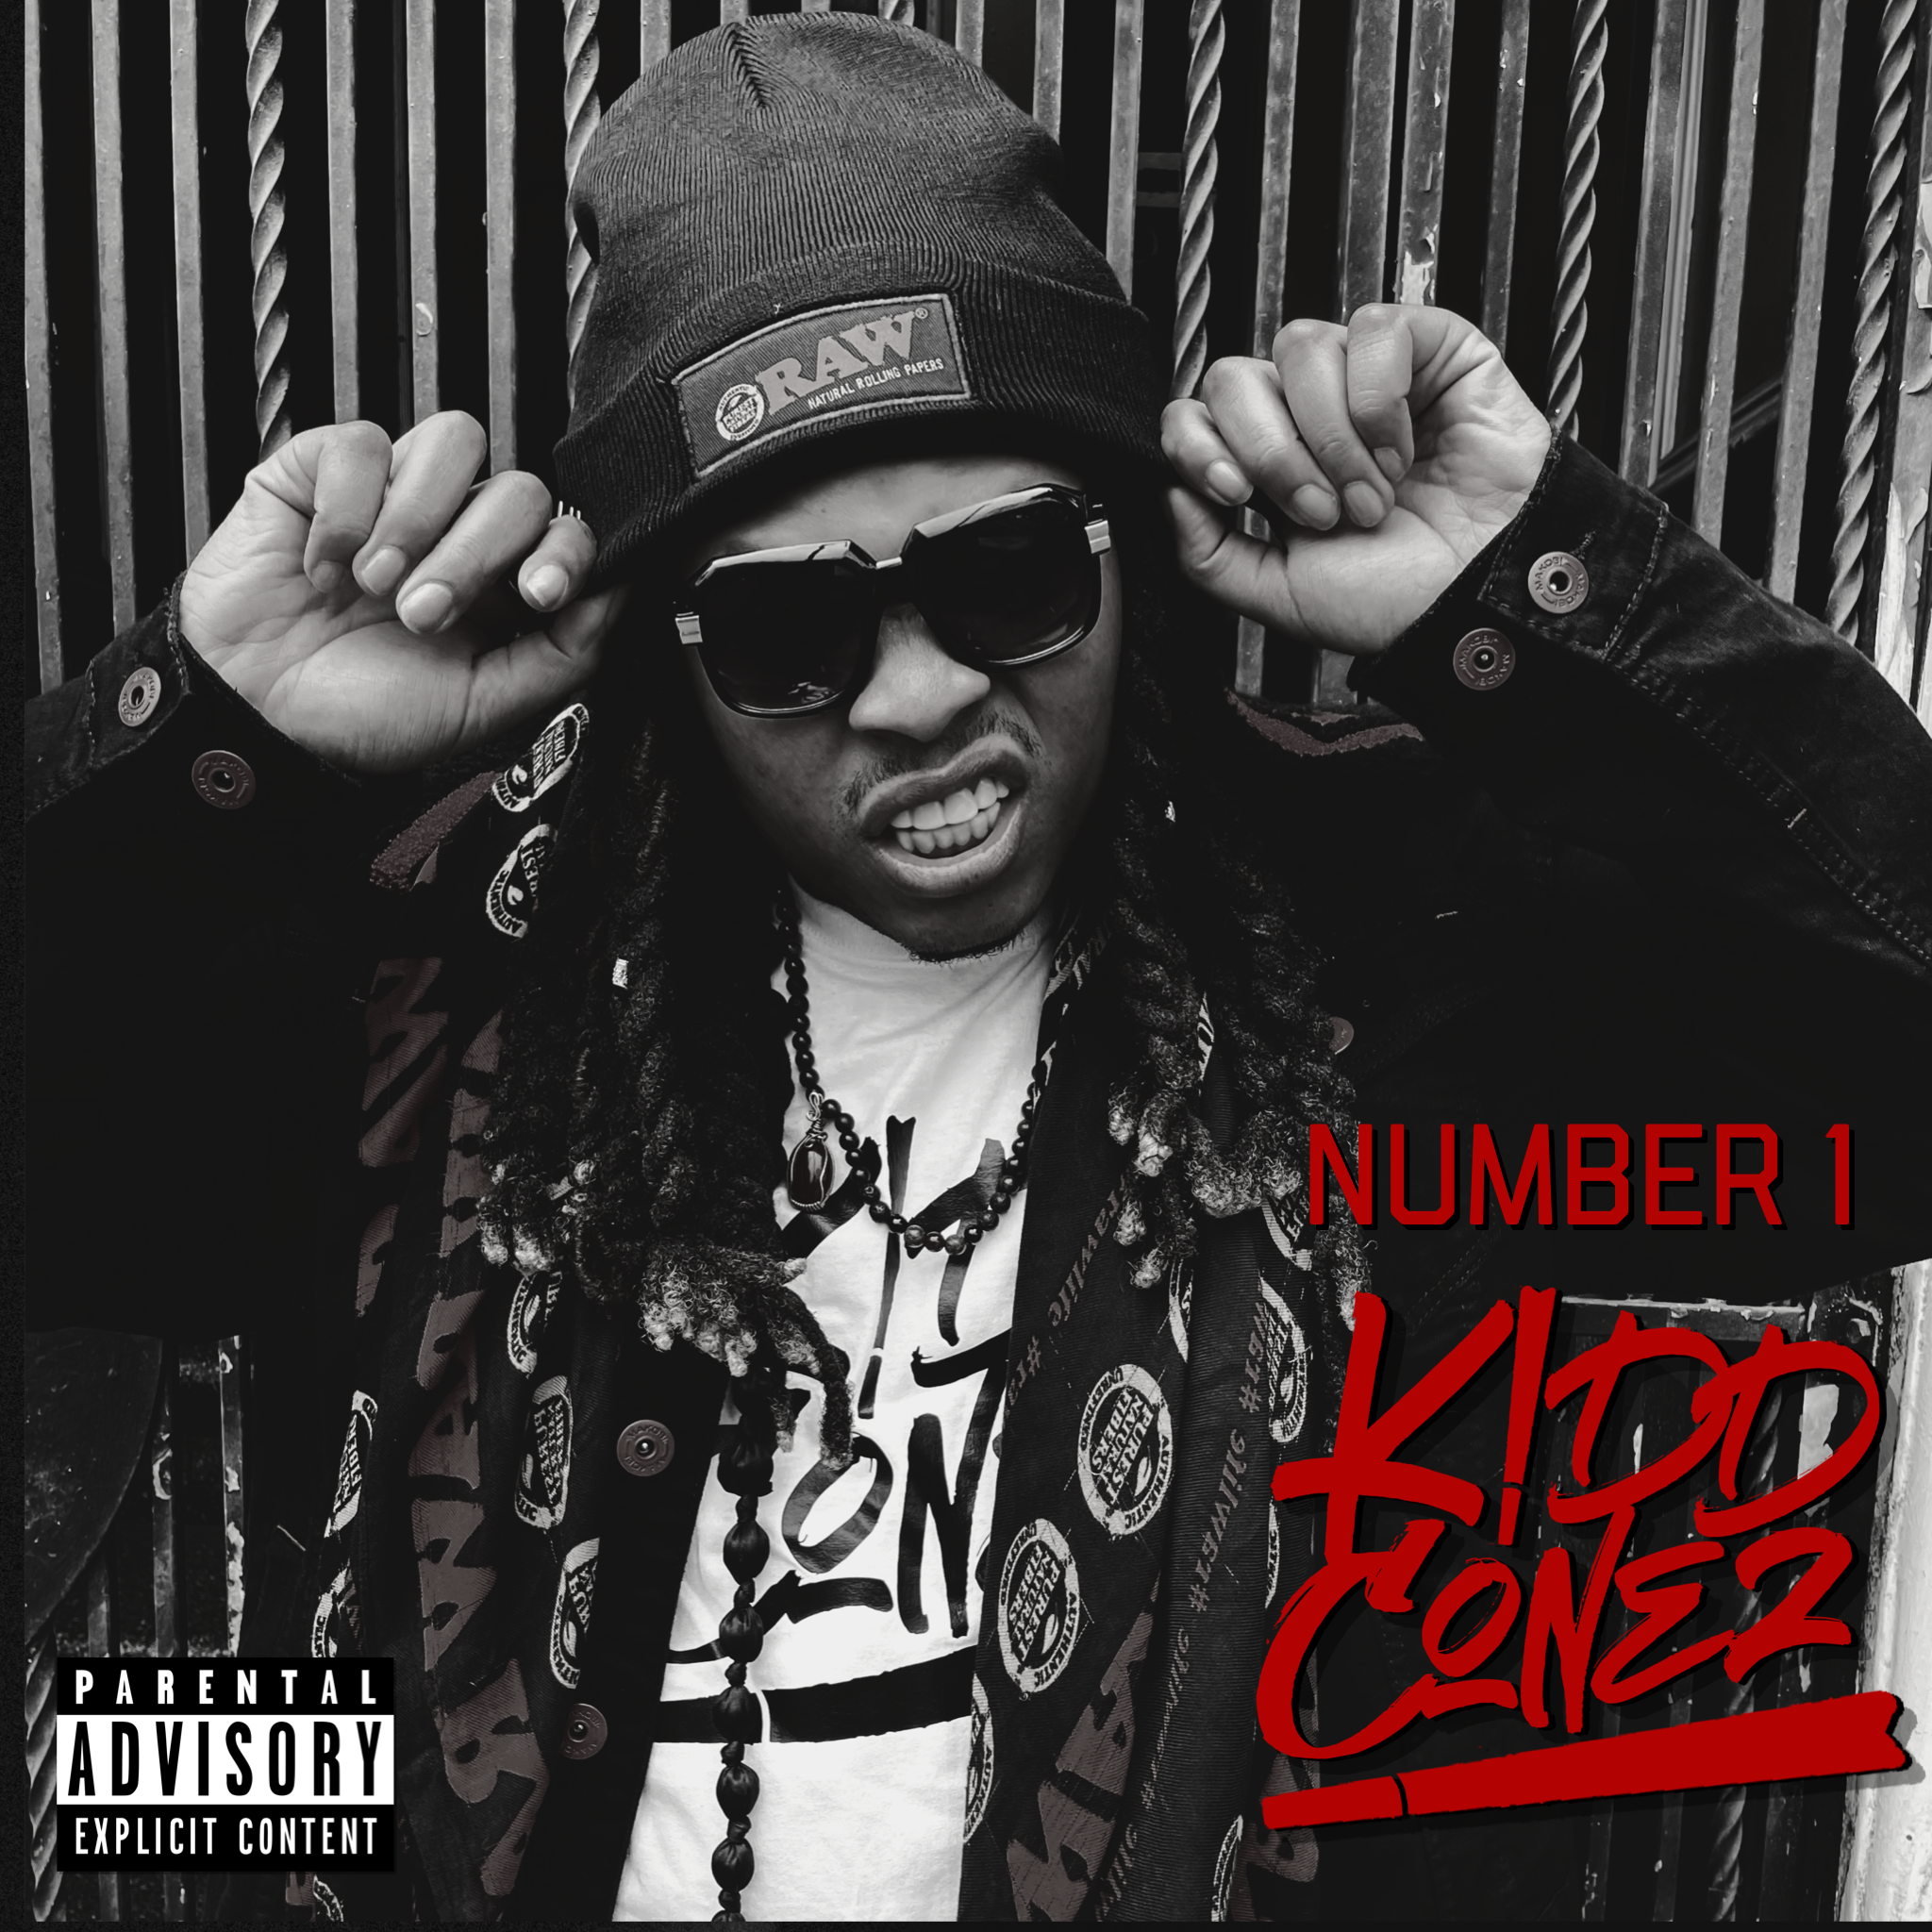 Number 1 - Kidd Conez Feat. Stevie Stone